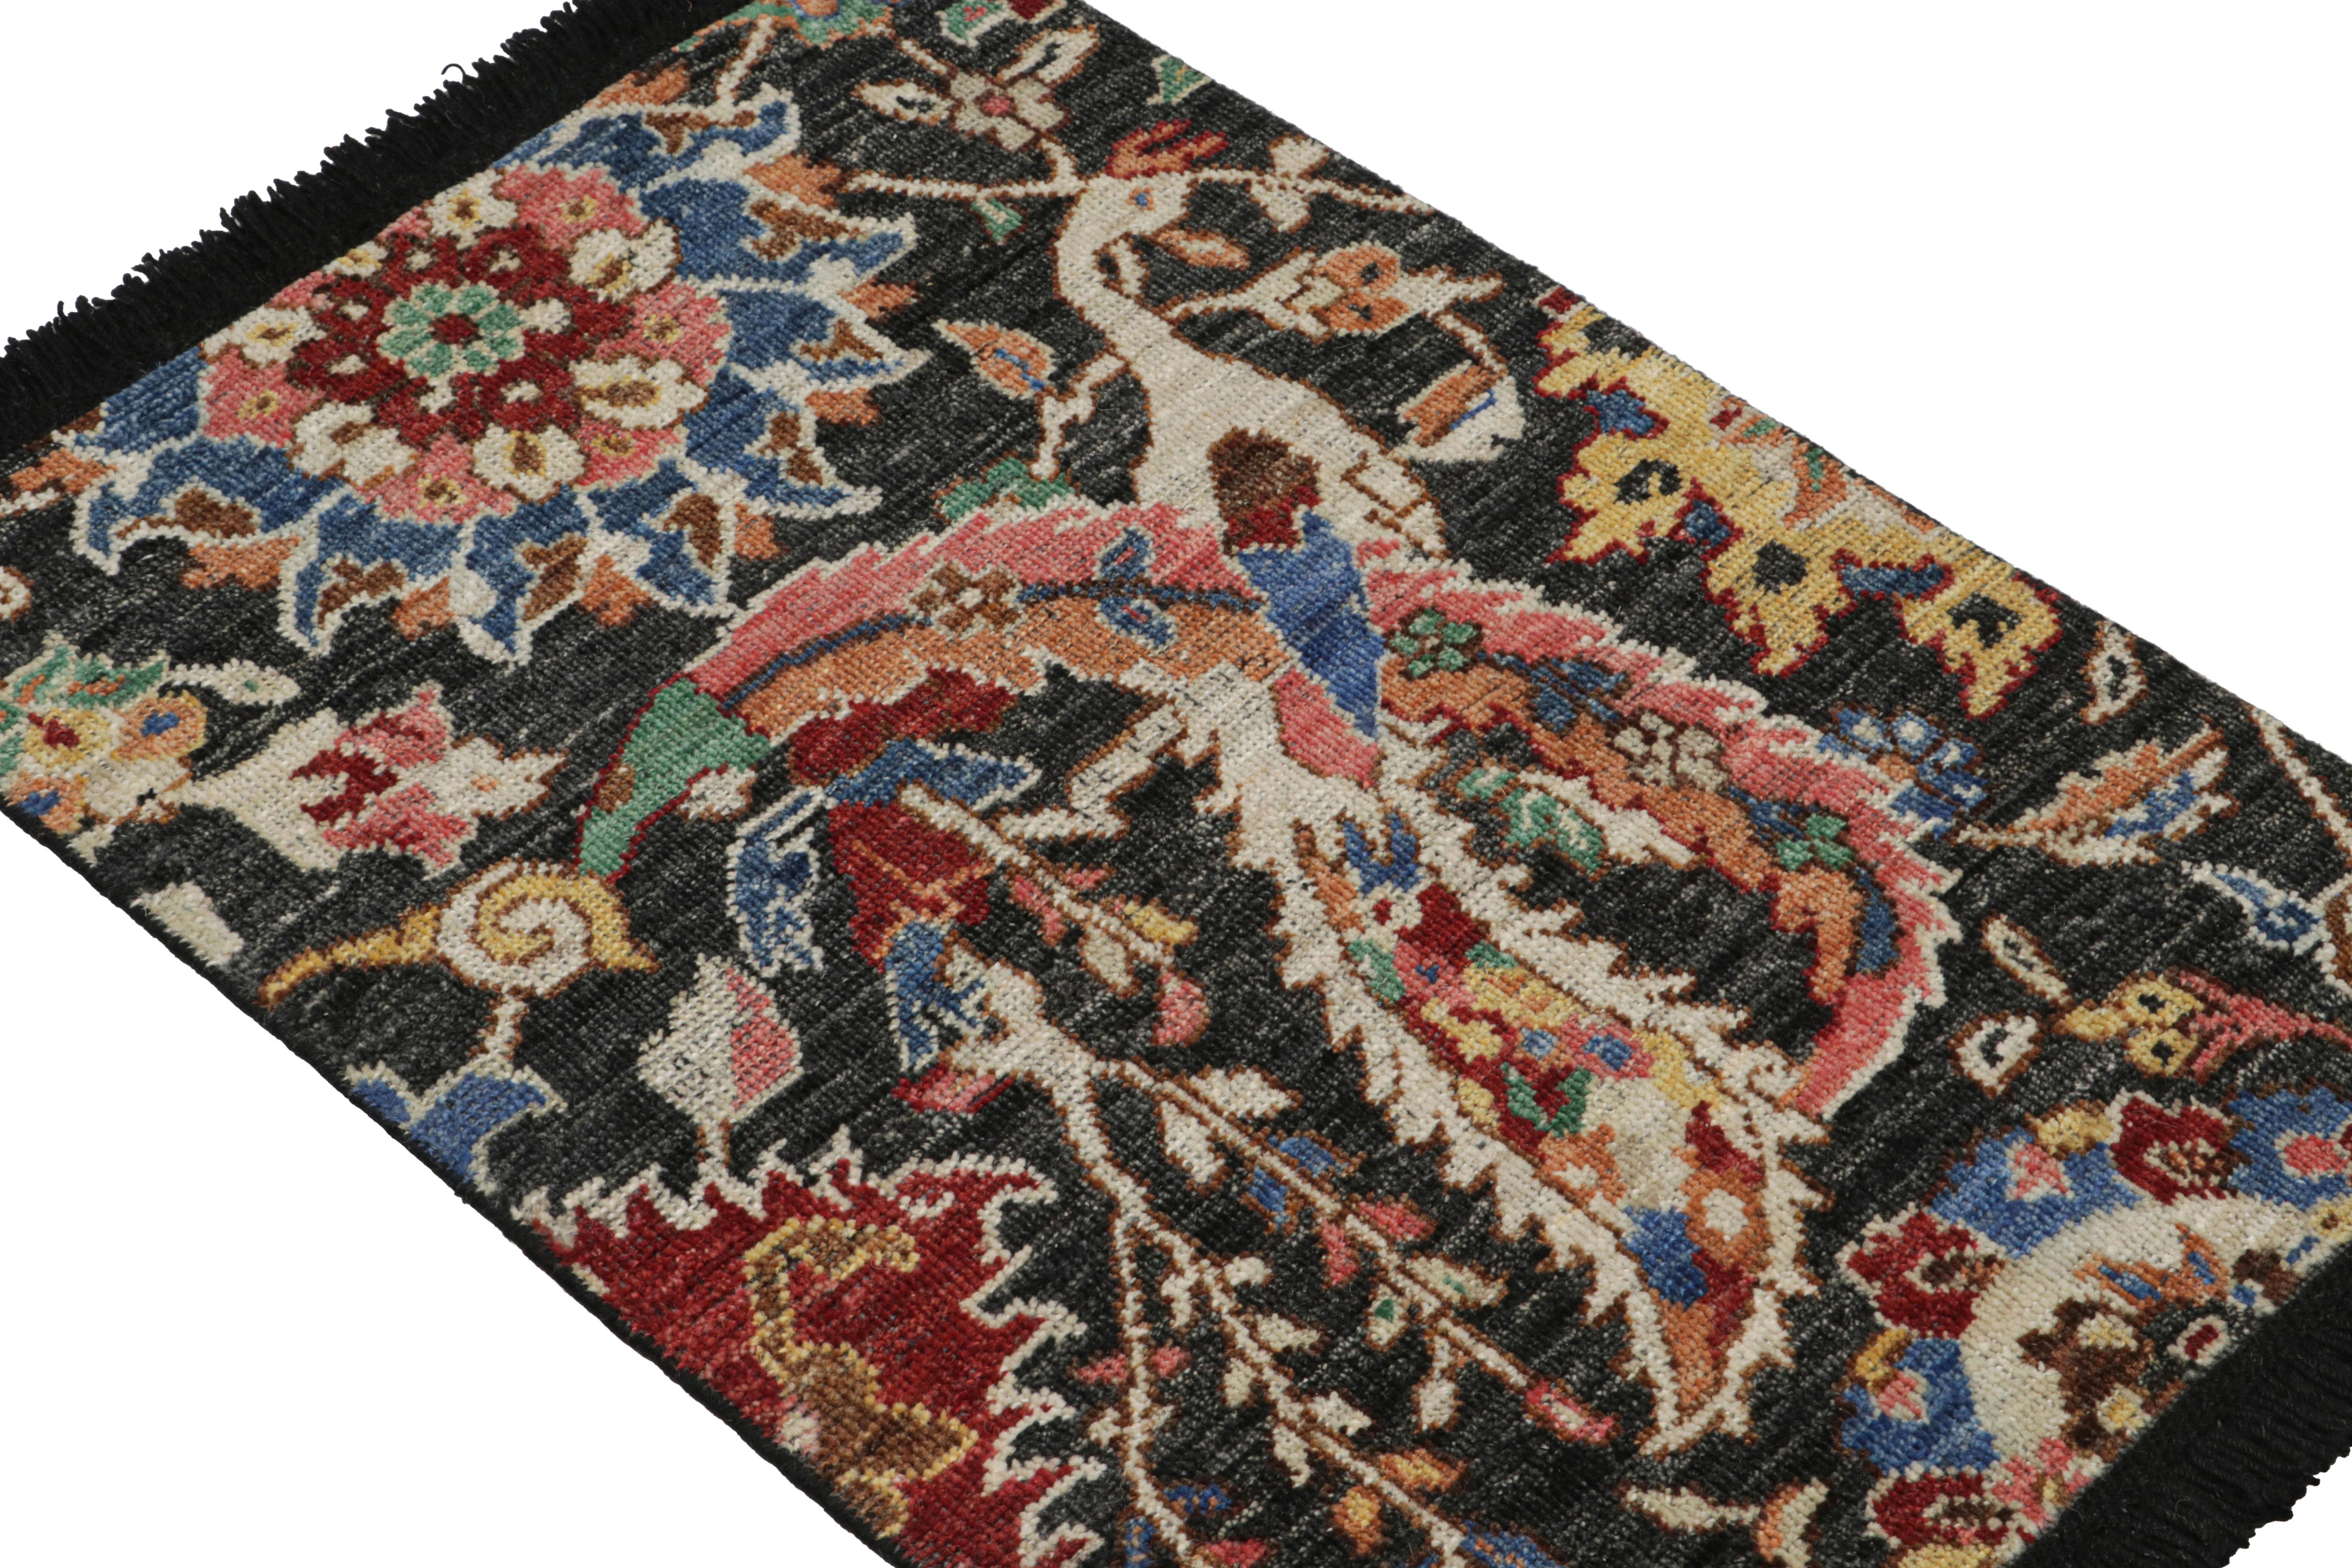 This contemporary 2x3 rug is a grand new entry to Rug & Kilim’s custom classics Burano Collection. Hand-knotted in wool, this design is inspired by 17th-century antique Persian rugs of the Kerman province. 

On the design: 

Connoisseurs may admire